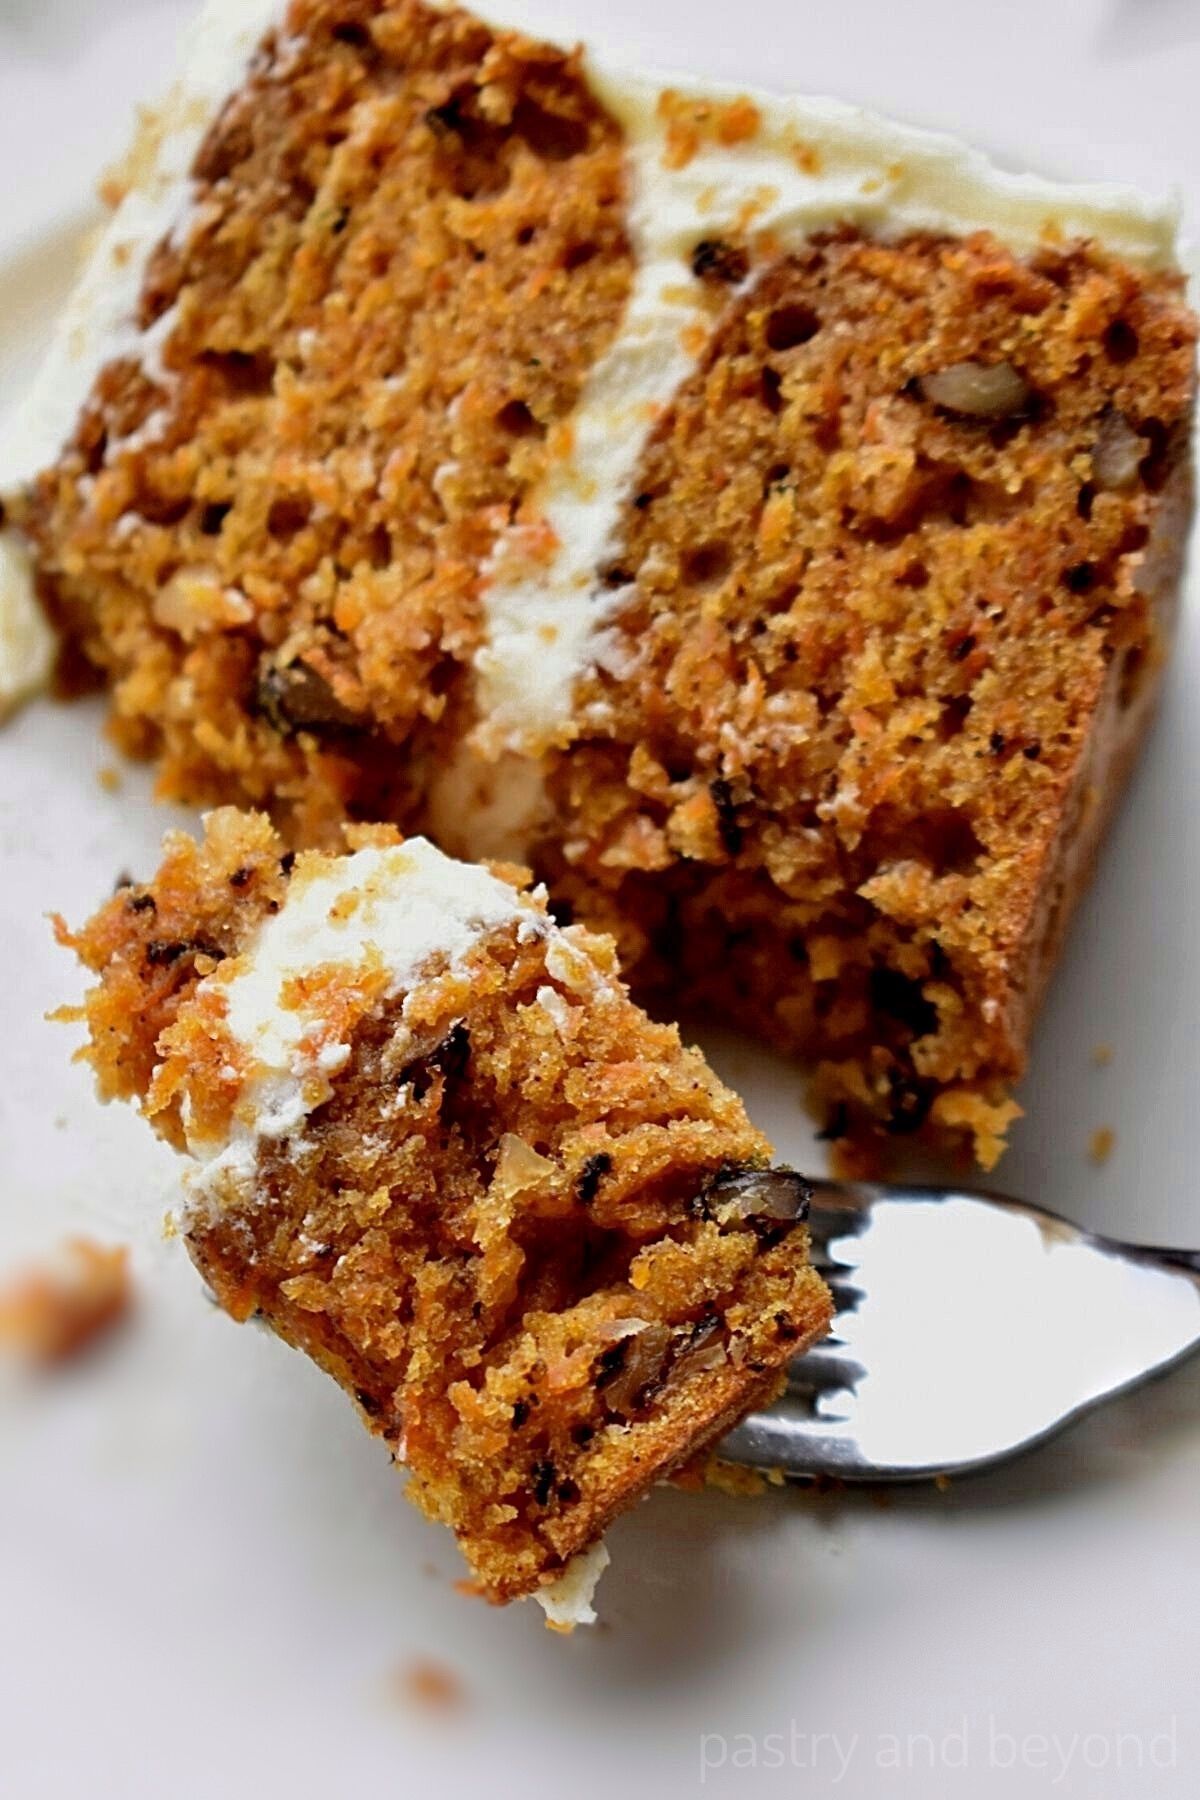 Carrot cake on a plate with a bite taken.